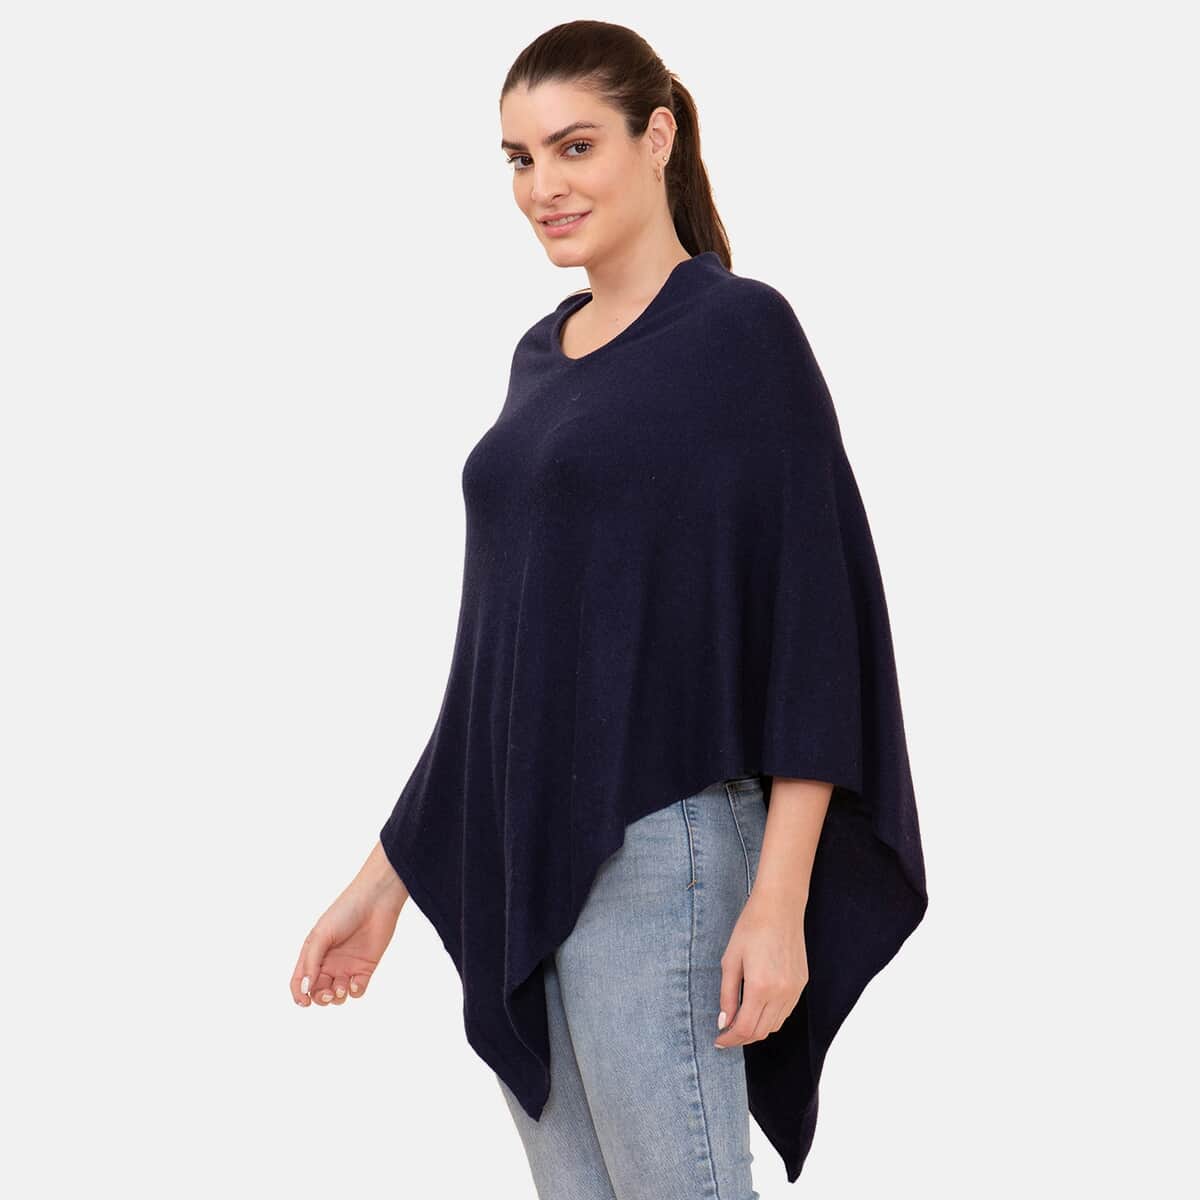 LA MAREY Cashmere Wool Black Poncho (One Size Fits Most, 28"x28") image number 3